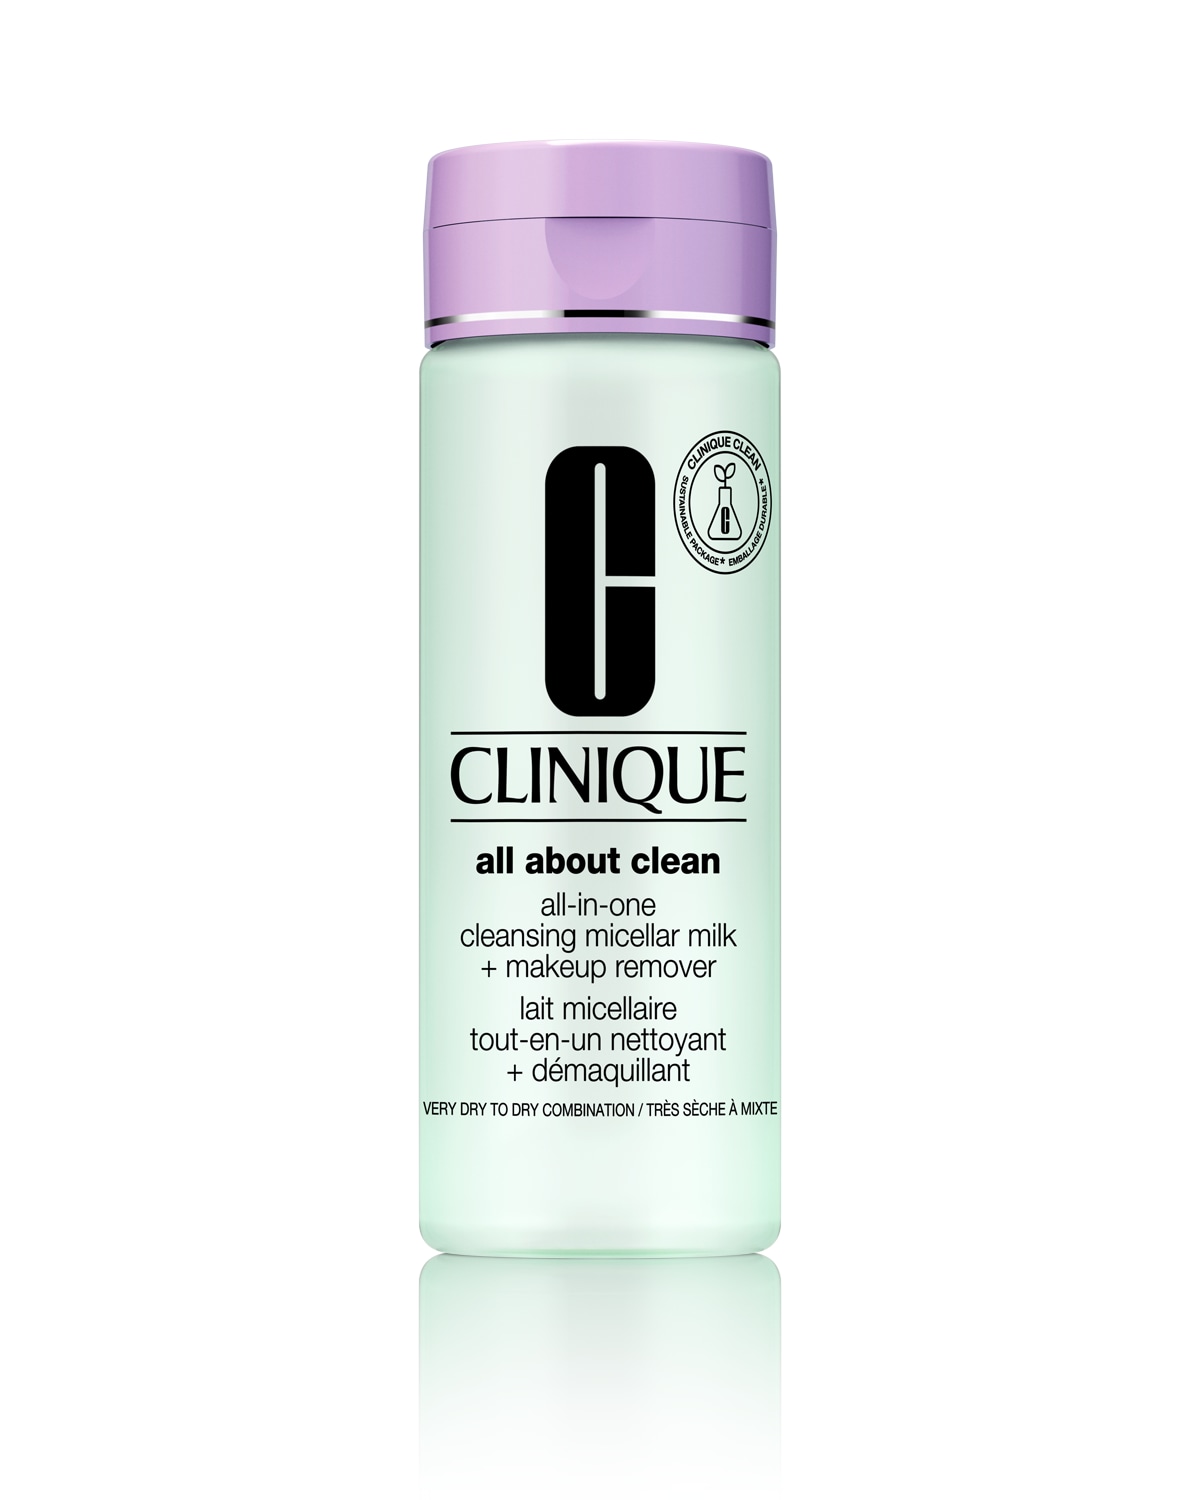 All-in-One Cleansing Micellar Milk + Makeup Remover<br> Micellás sminklemosó